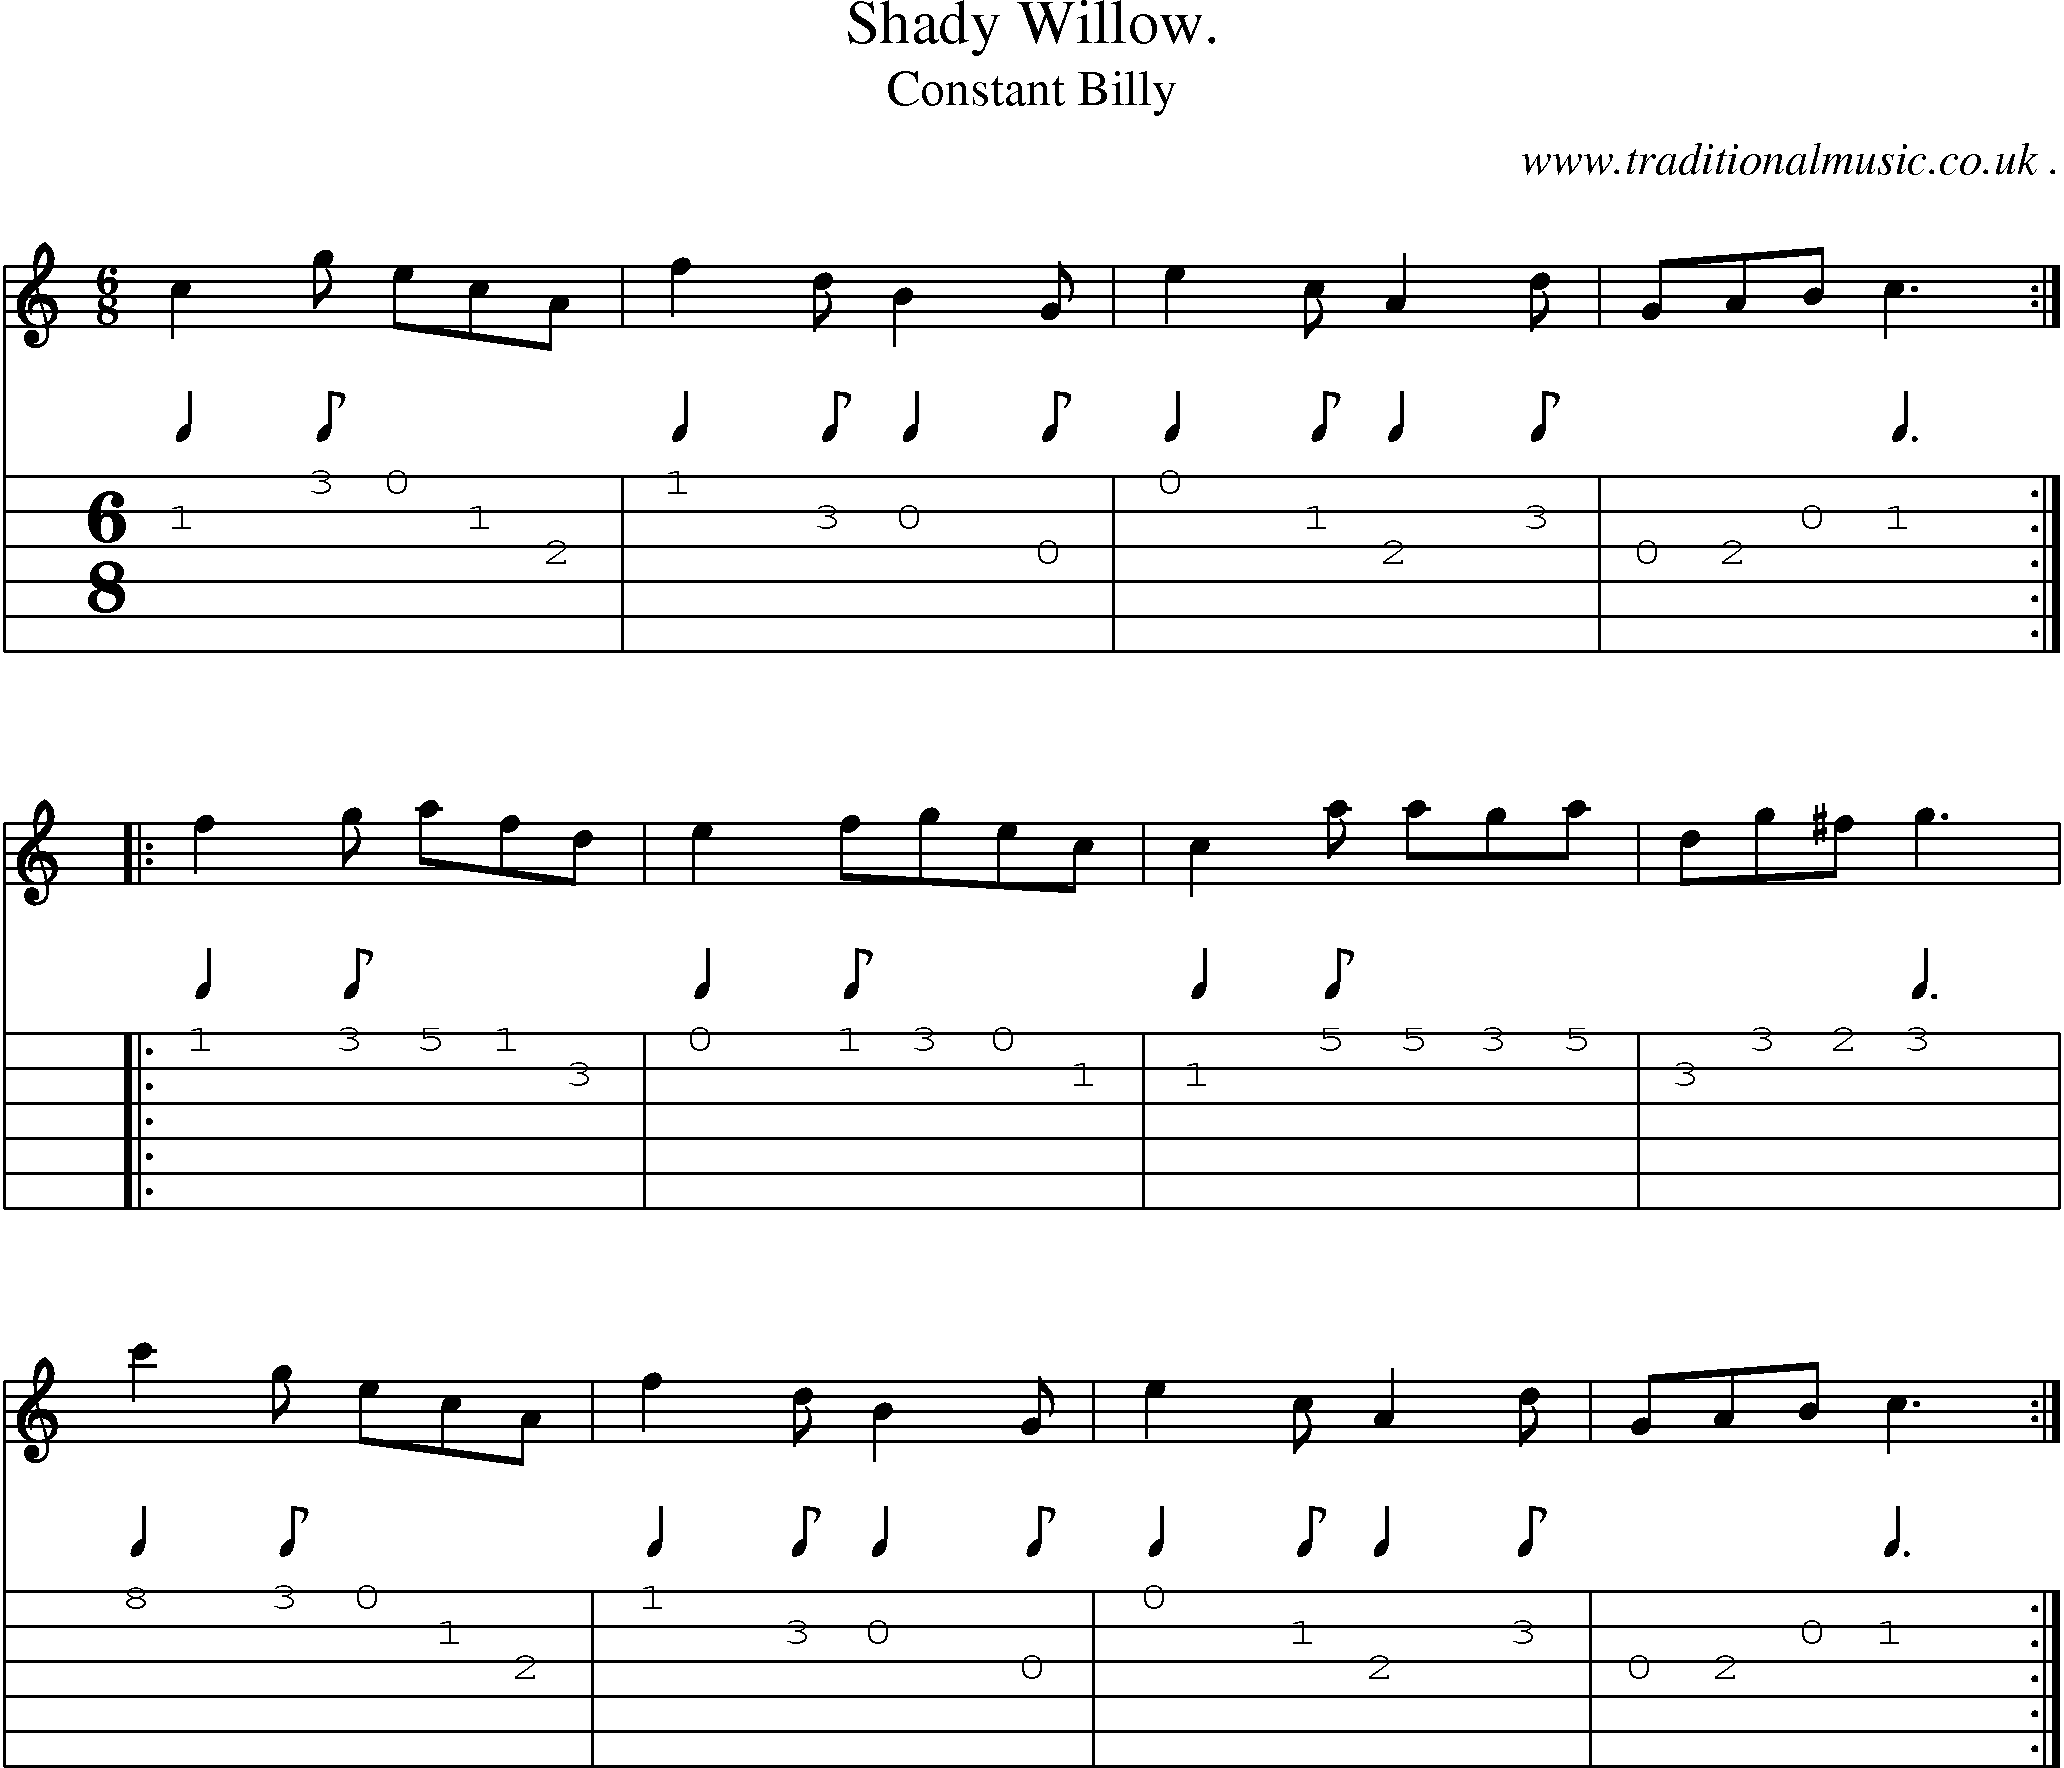 Sheet-Music and Guitar Tabs for Shady Willow